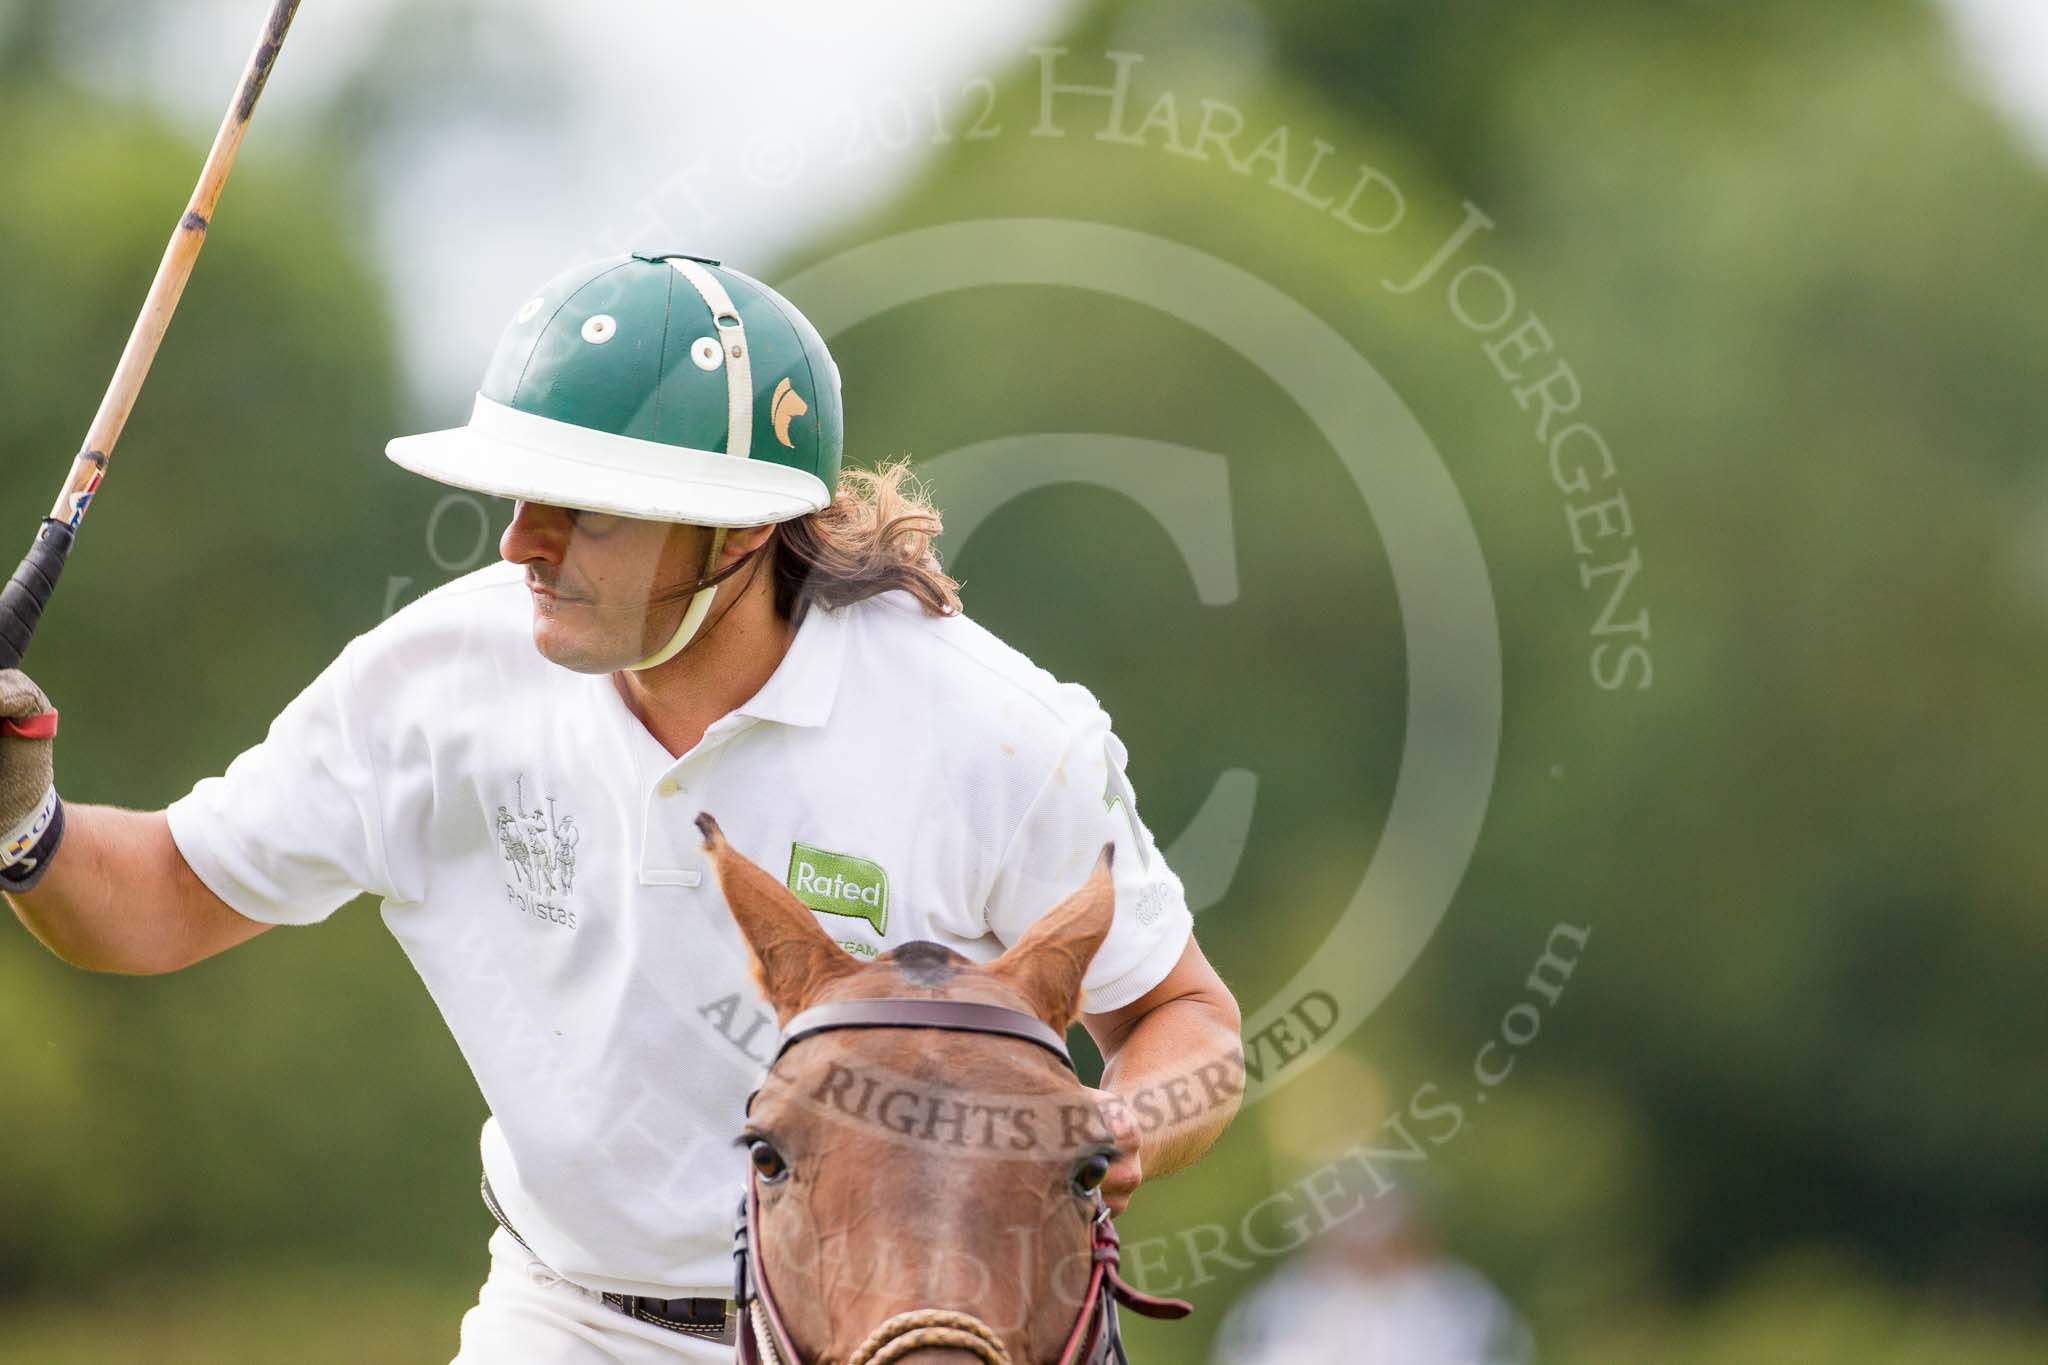 DBPC Polo in the Park 2012: Rated People Polo Team #1, Lolito Castagnolo..
Dallas Burston Polo Club,
Stoneythorpe Estate,
Southam,
Warwickshire,
United Kingdom,
on 16 September 2012 at 11:04, image #69